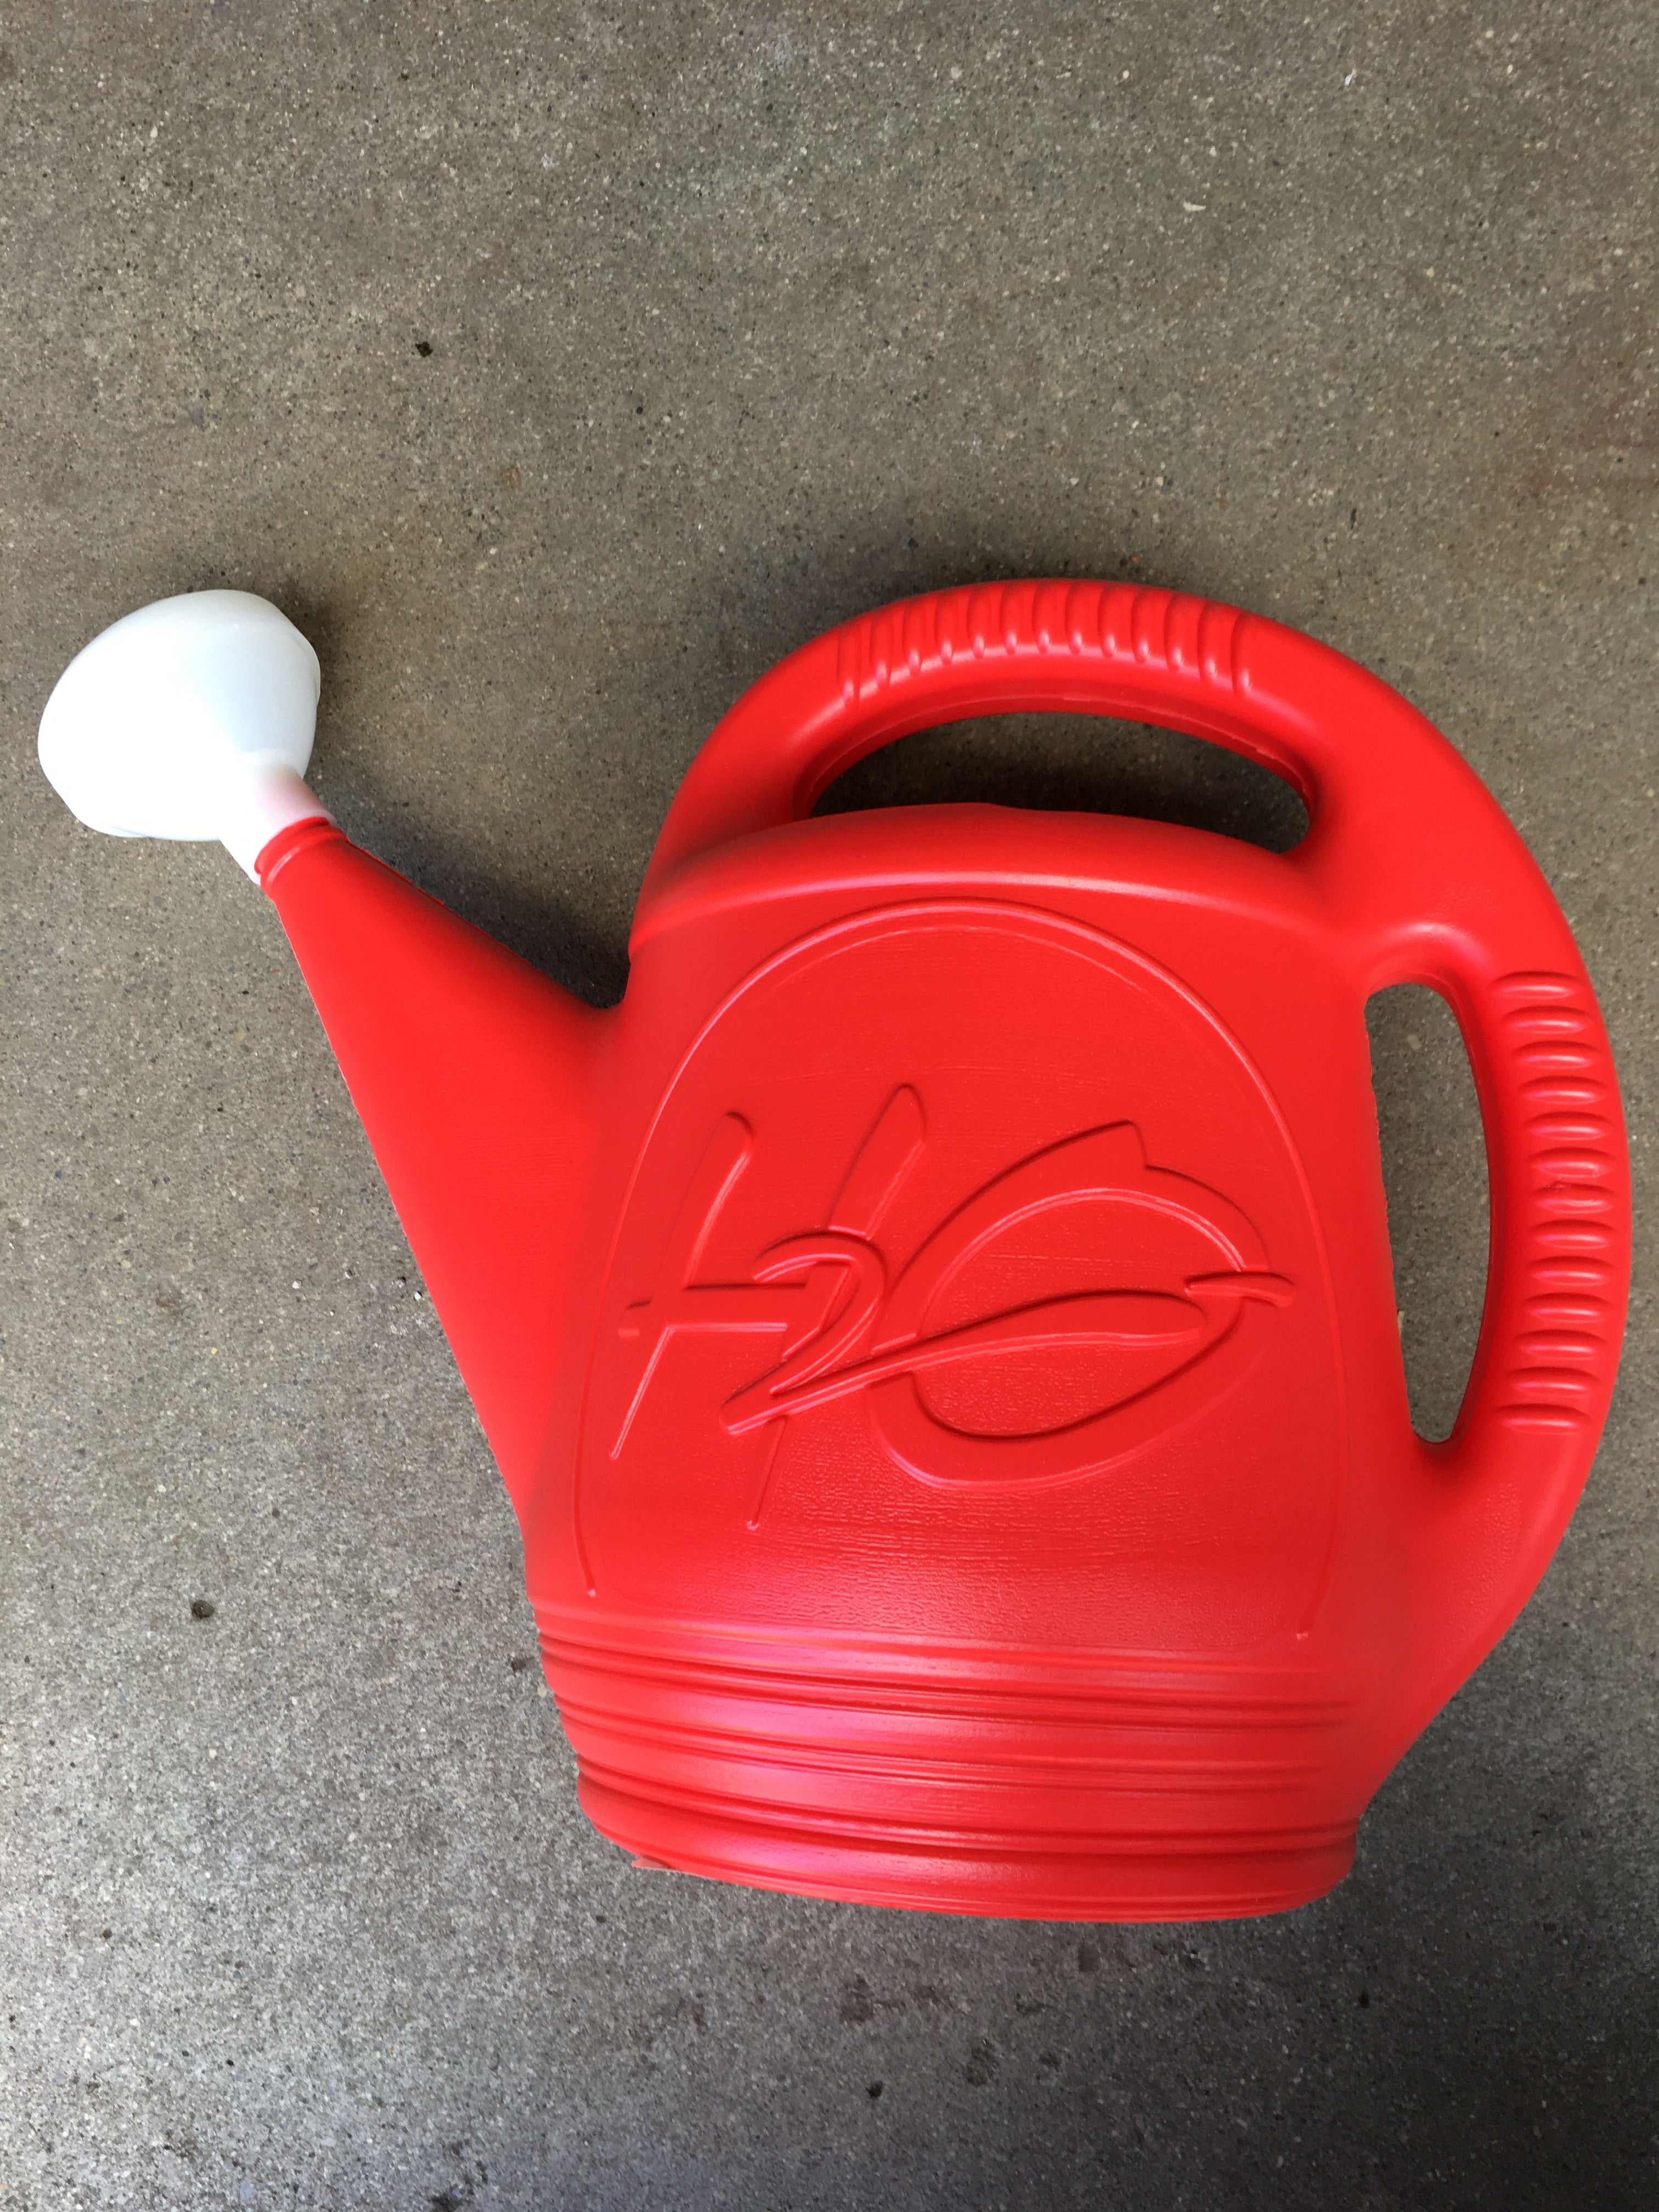 Watering Can (2 Gallon)